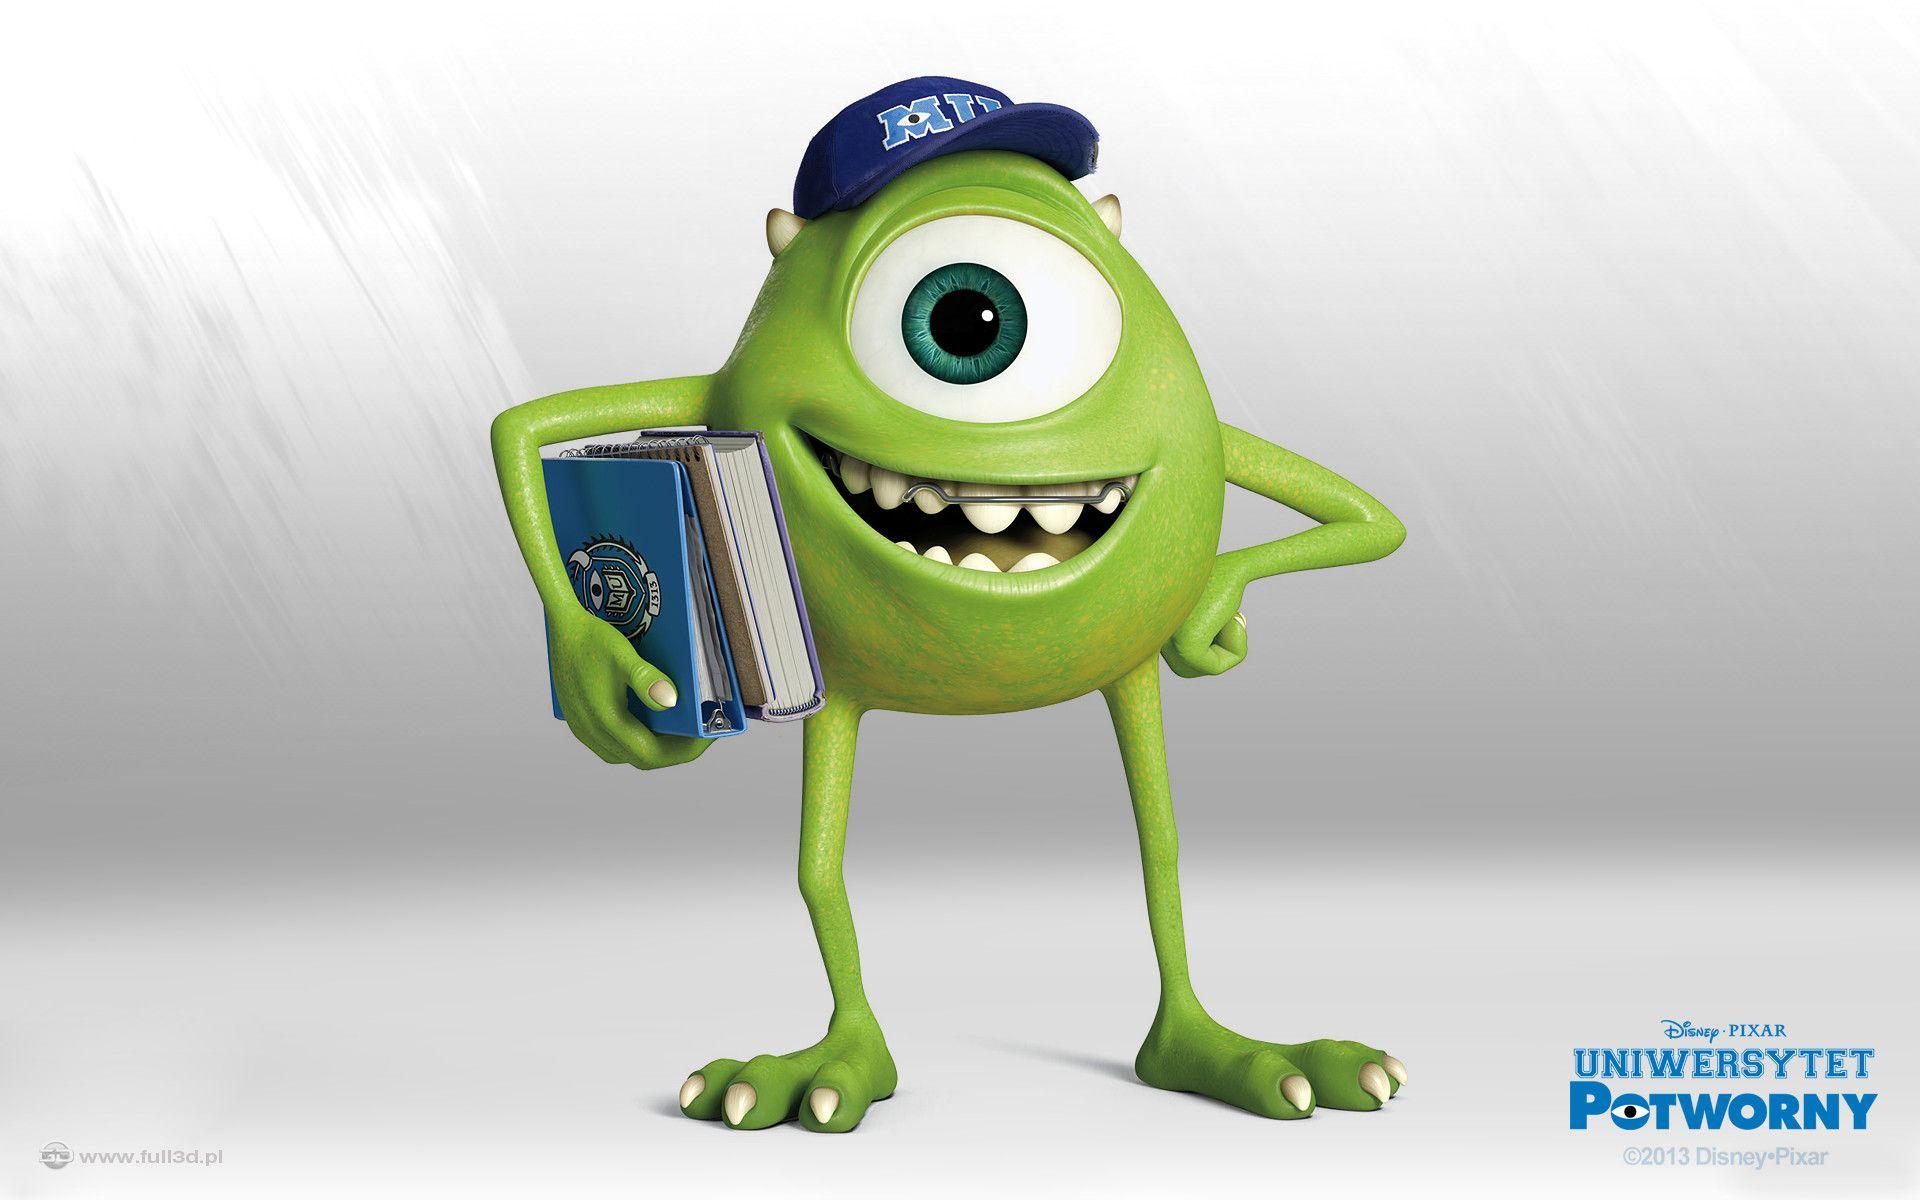 Mike Wazowski Wallpapers Iphone Wallpaper Cave